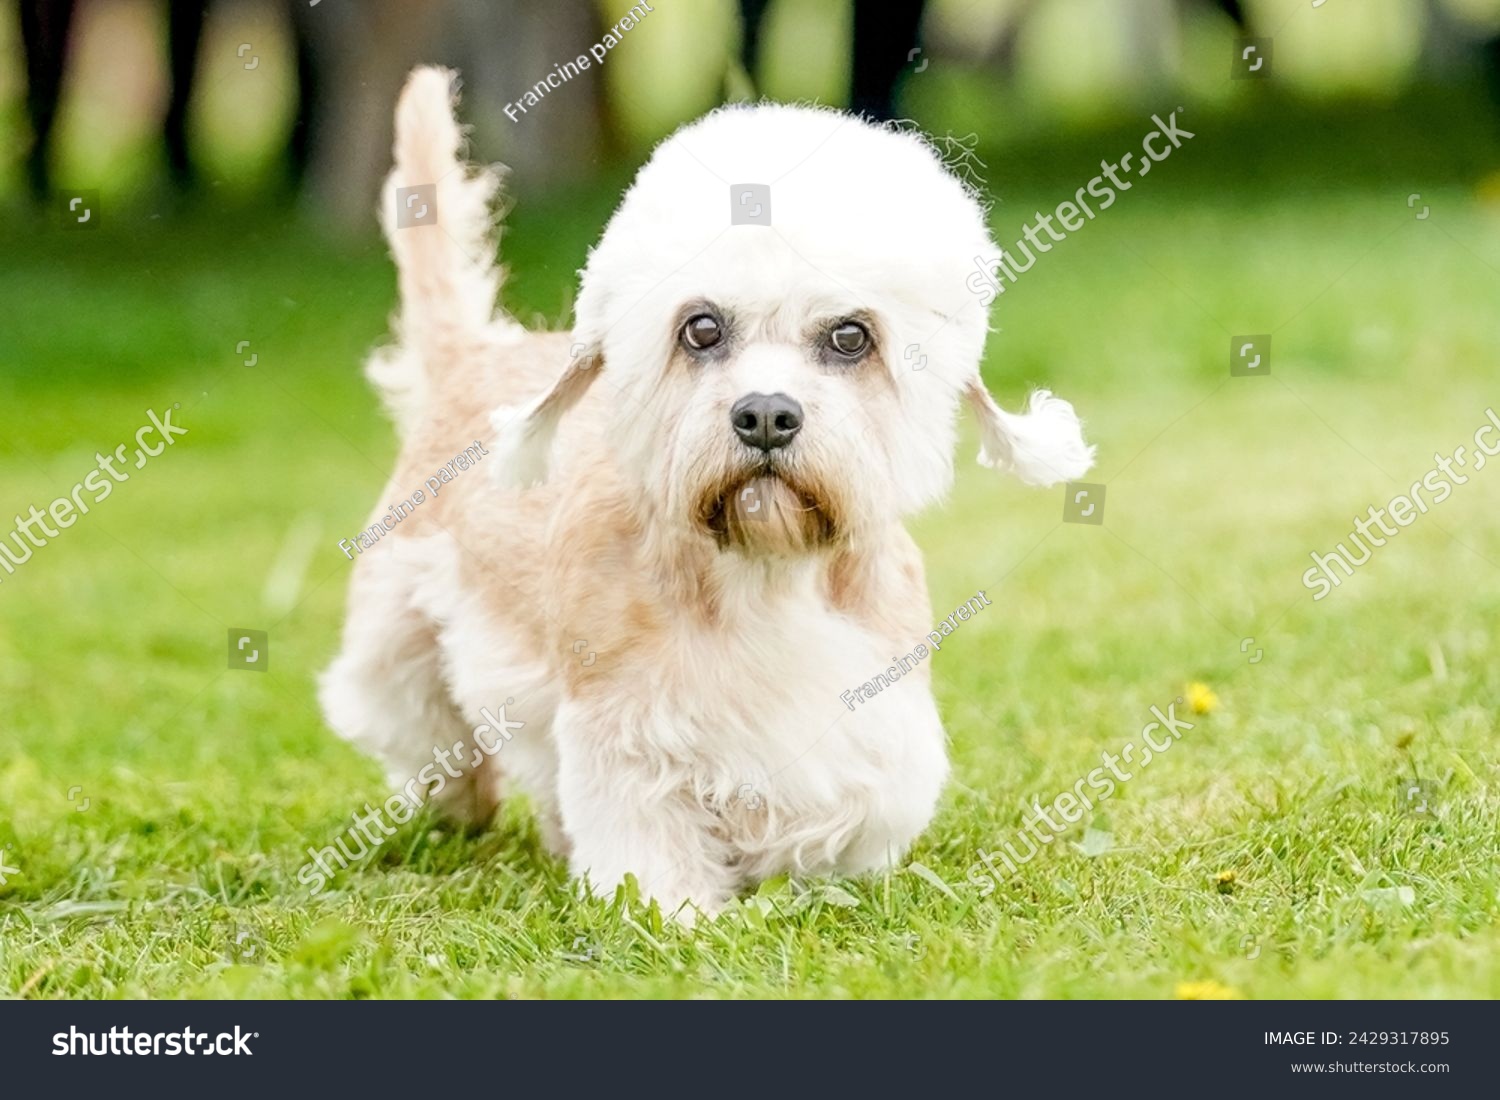 Dandie Dinmont Terrier dog standing in a field on a bright summer day
 #2429317895